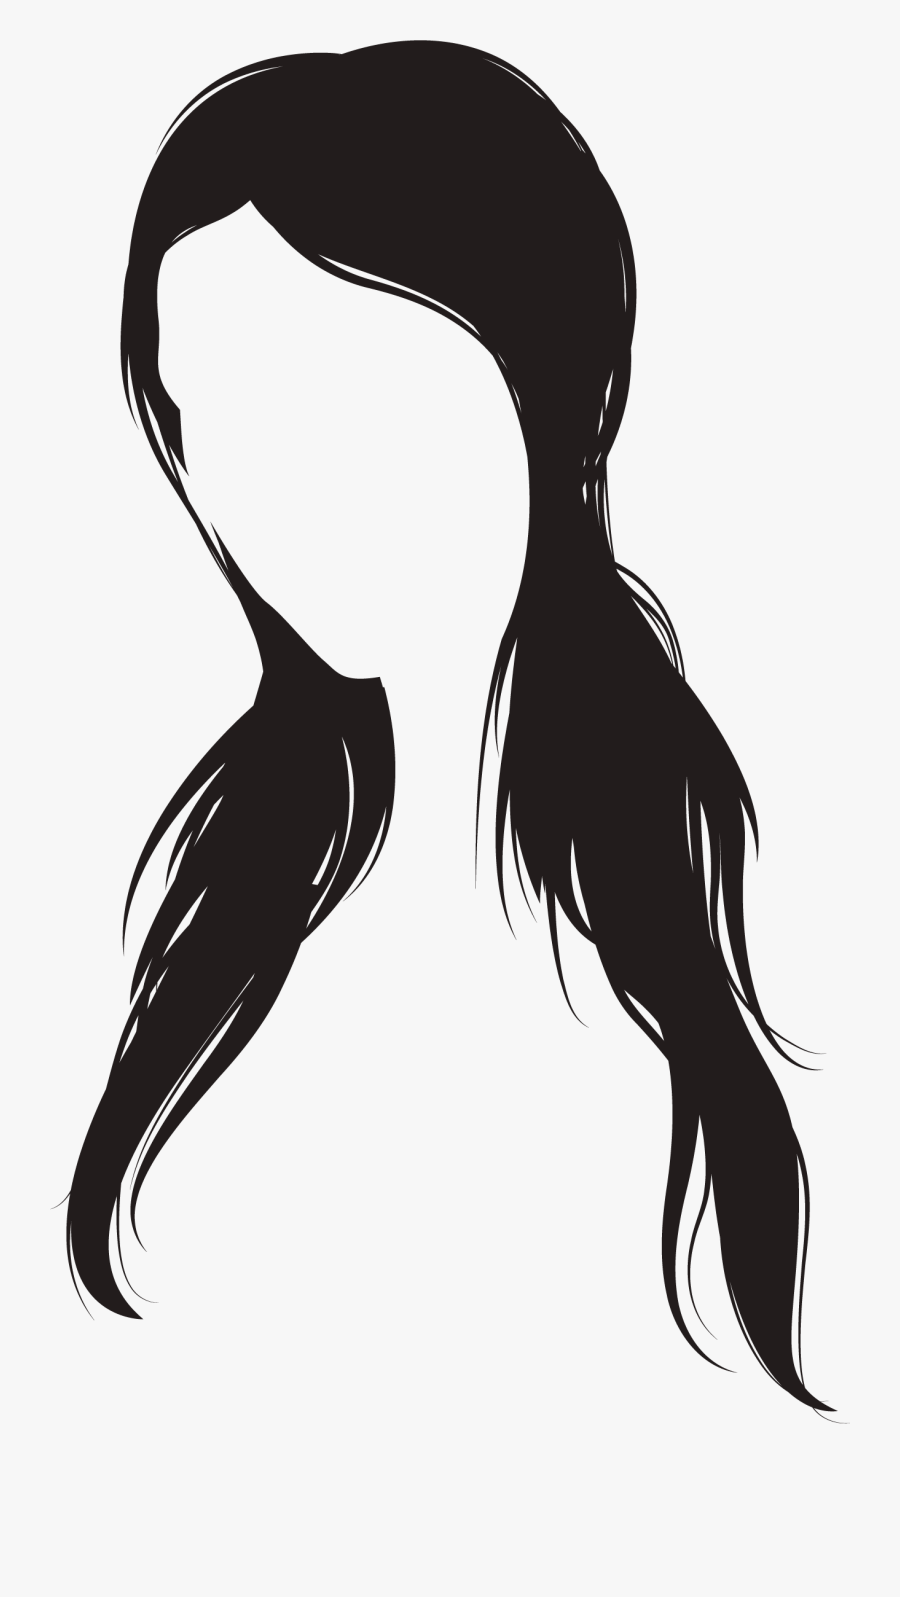 Hairstyle Euclidean Vector - Hairstyle For Girls Png Vector, Transparent Clipart